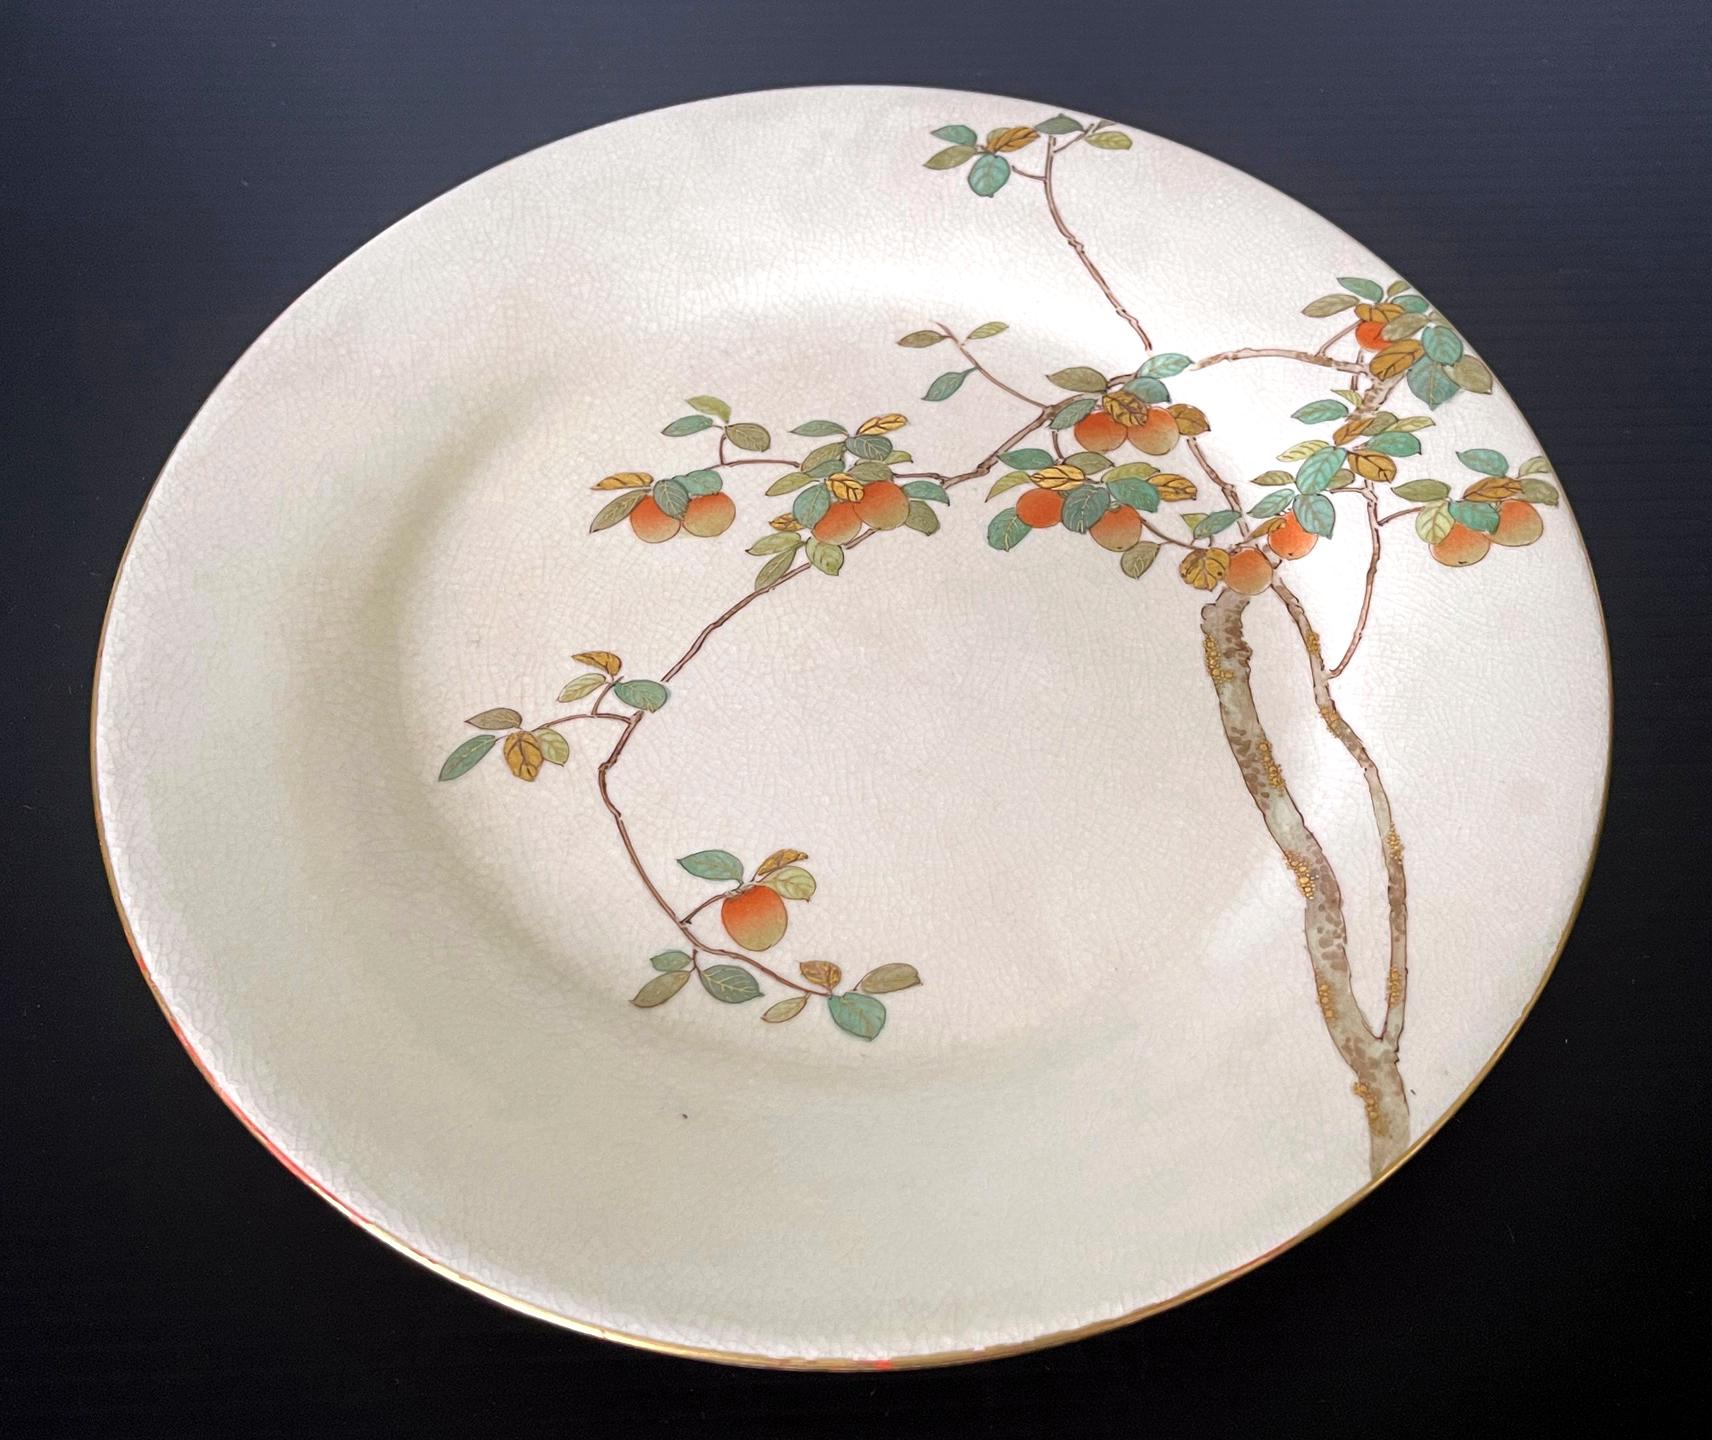 A fine Japanese ceramic satsuma plate made by Kinkozan and retailed by Yamanaka & Co. circa 1900-20s (late Meiji to early Tasho Period). The cream-color glazed plate features a very fine decoration of a persimmon tree bearing fruits. The composition